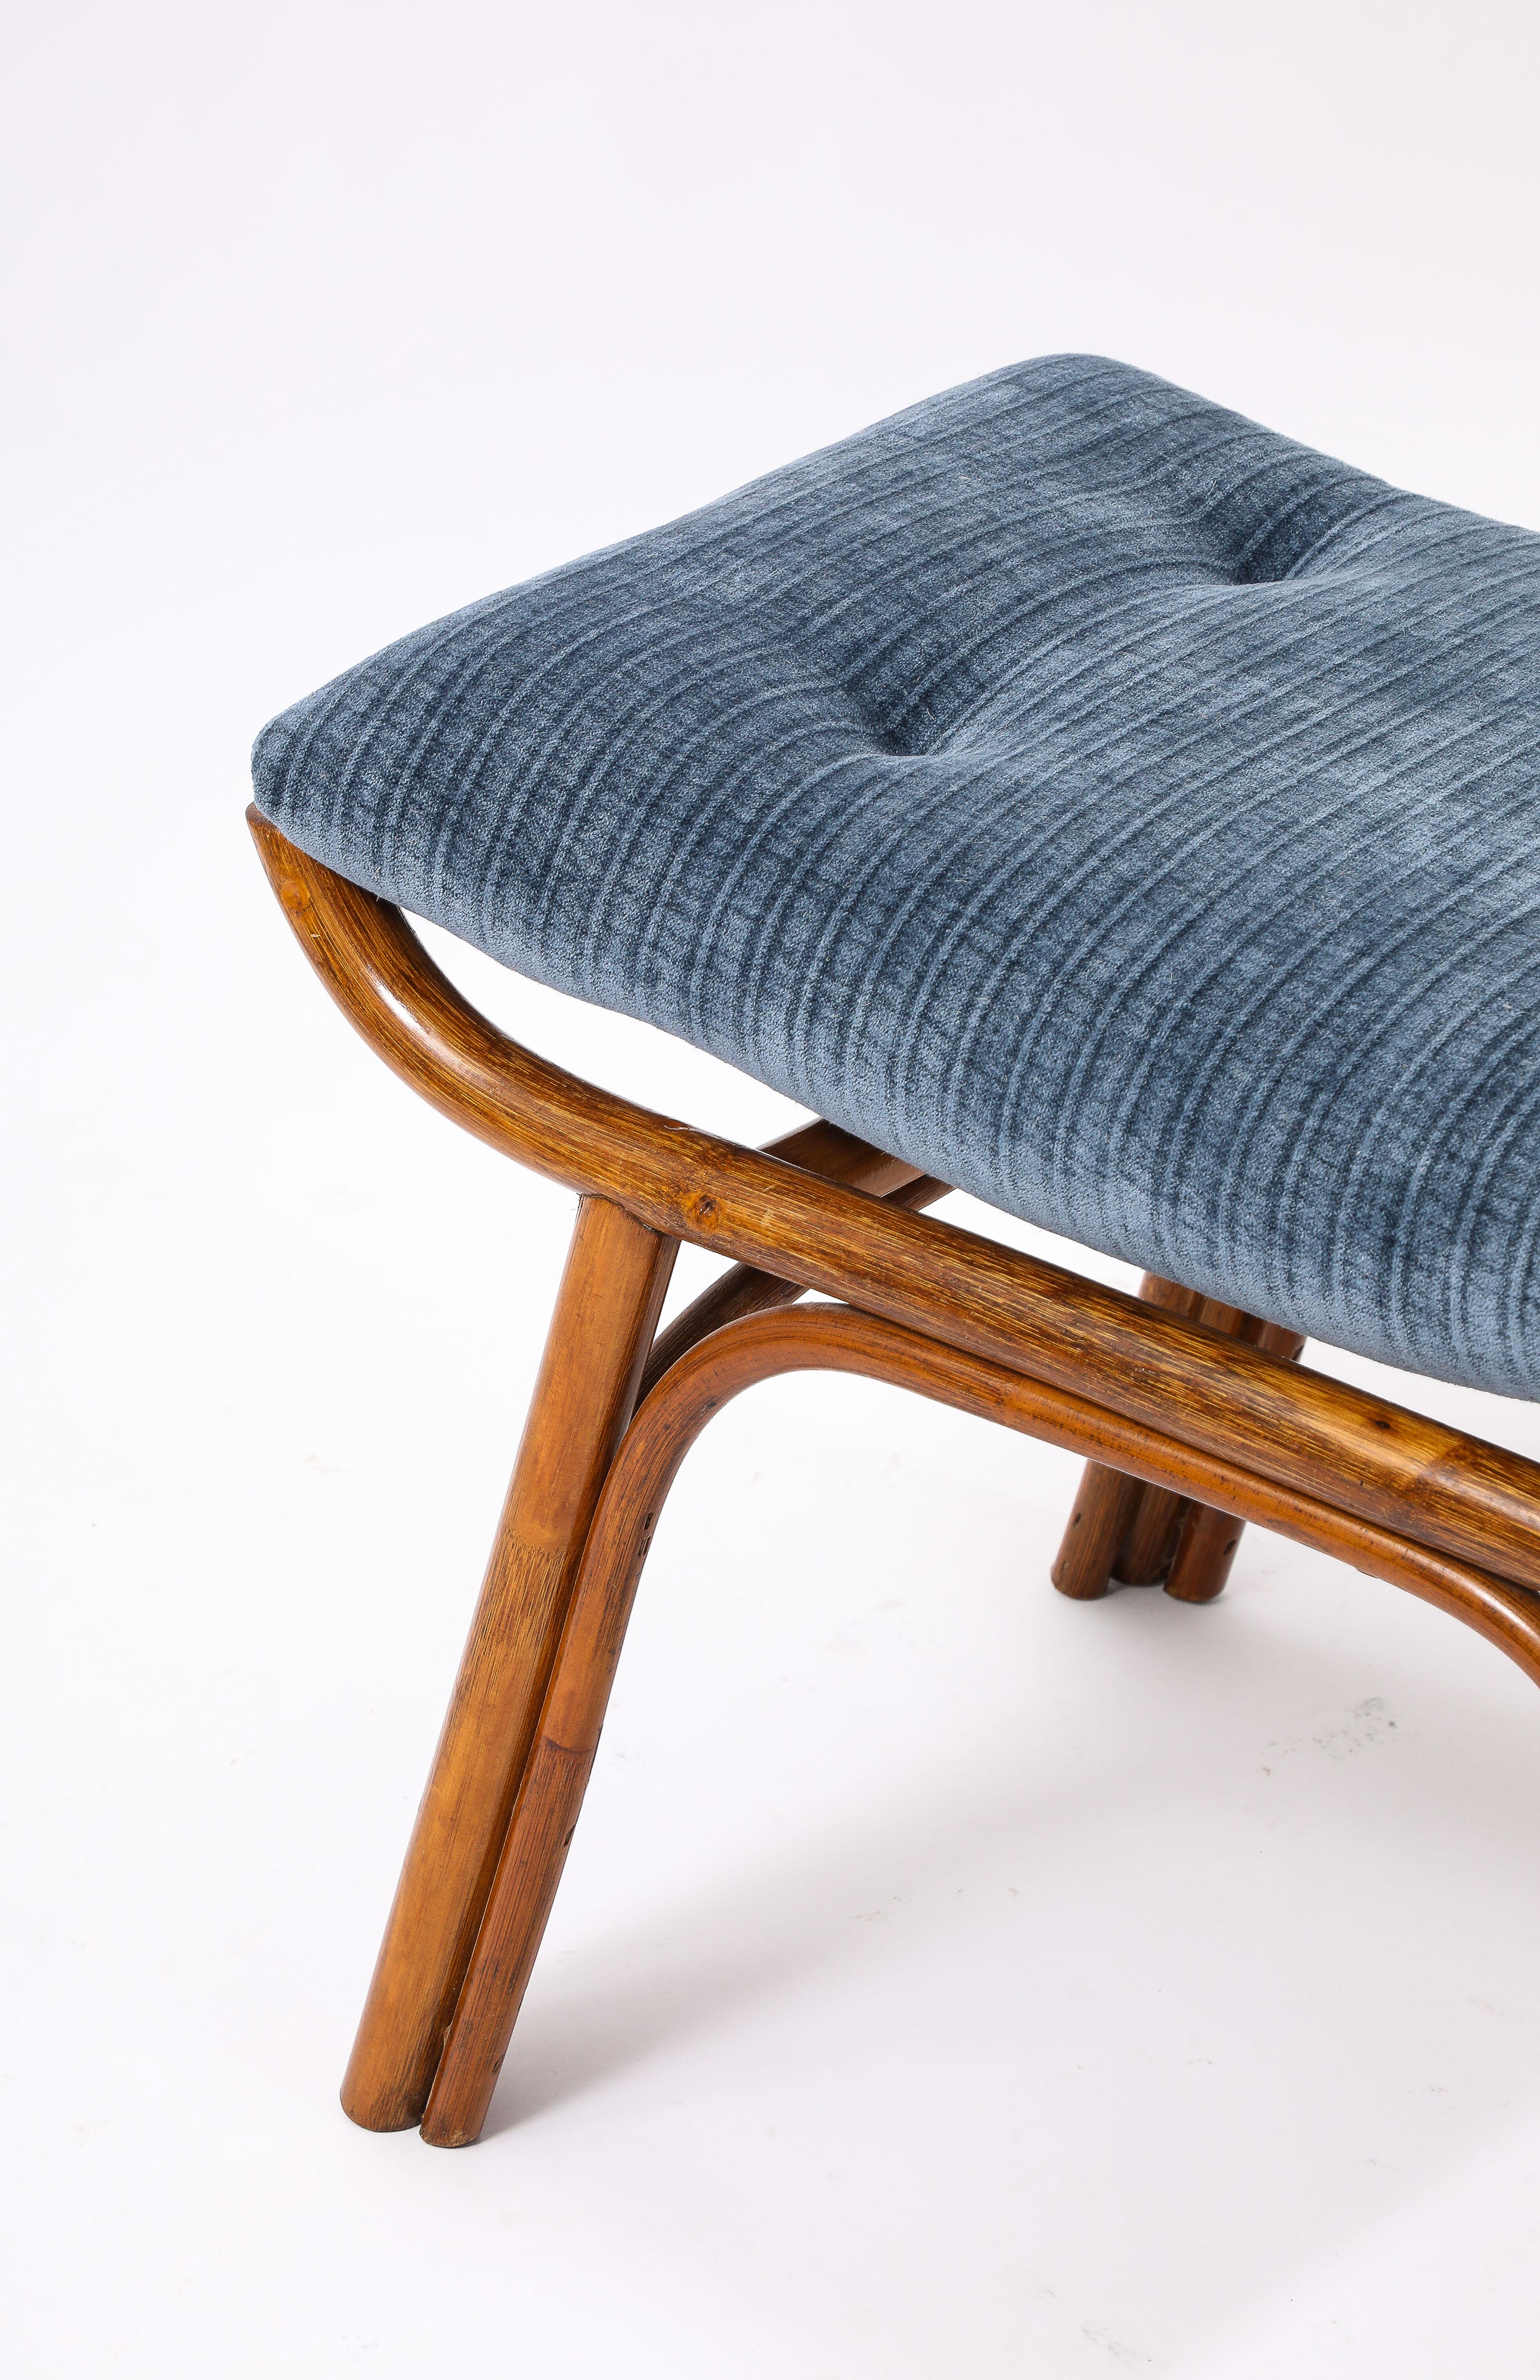 Curved Bamboo Stools in Blue Mohair, France 1950's For Sale 1